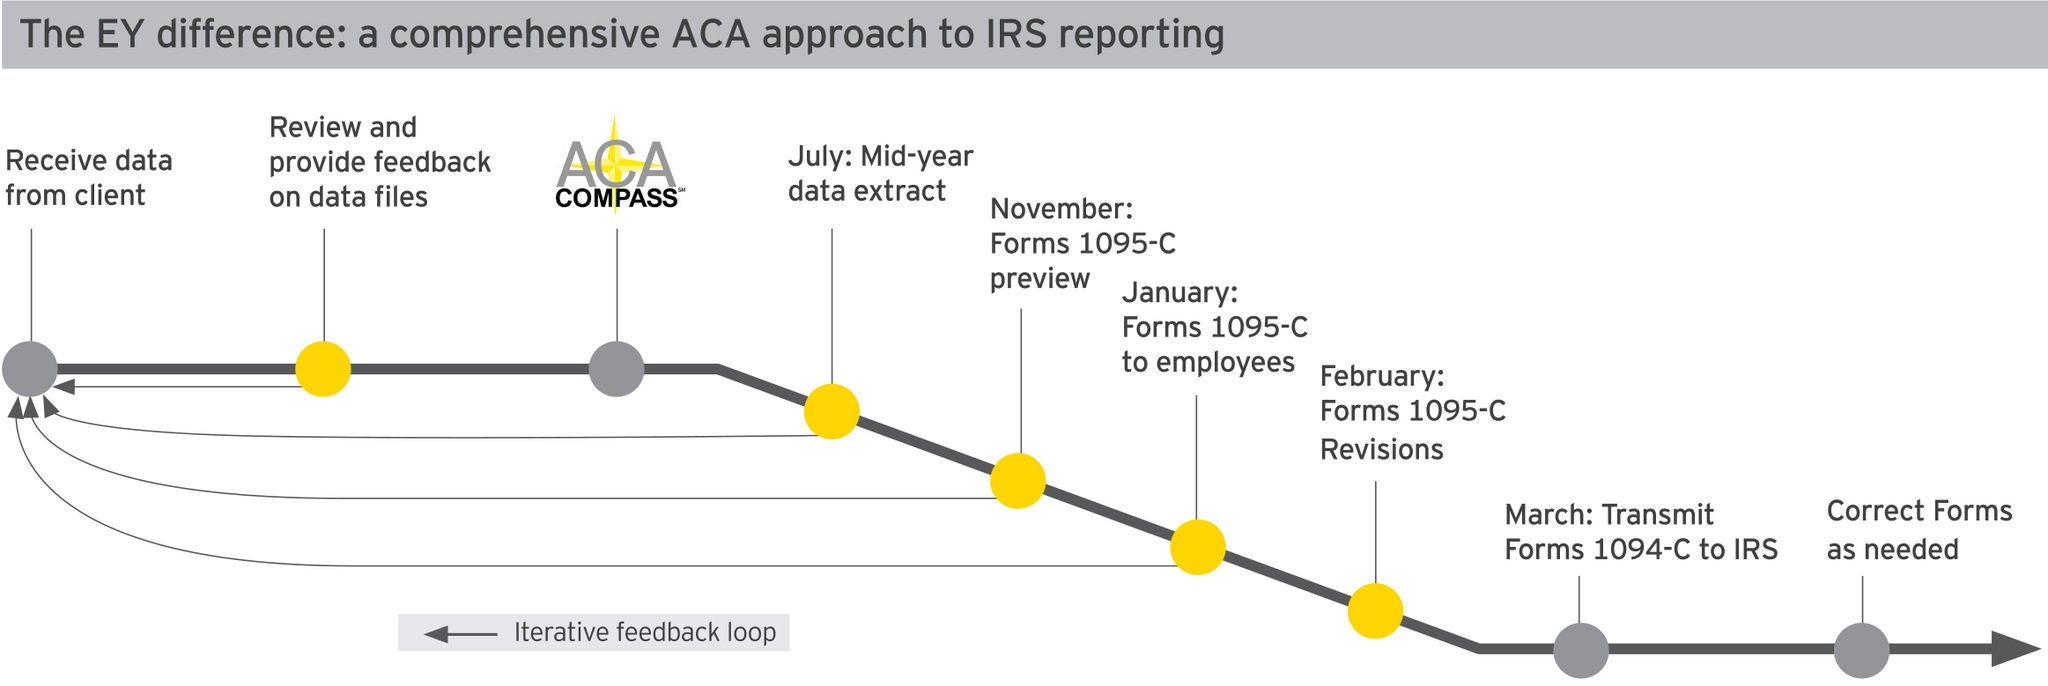 The EY difference: a comprehensive ACA approach to IRS reporting